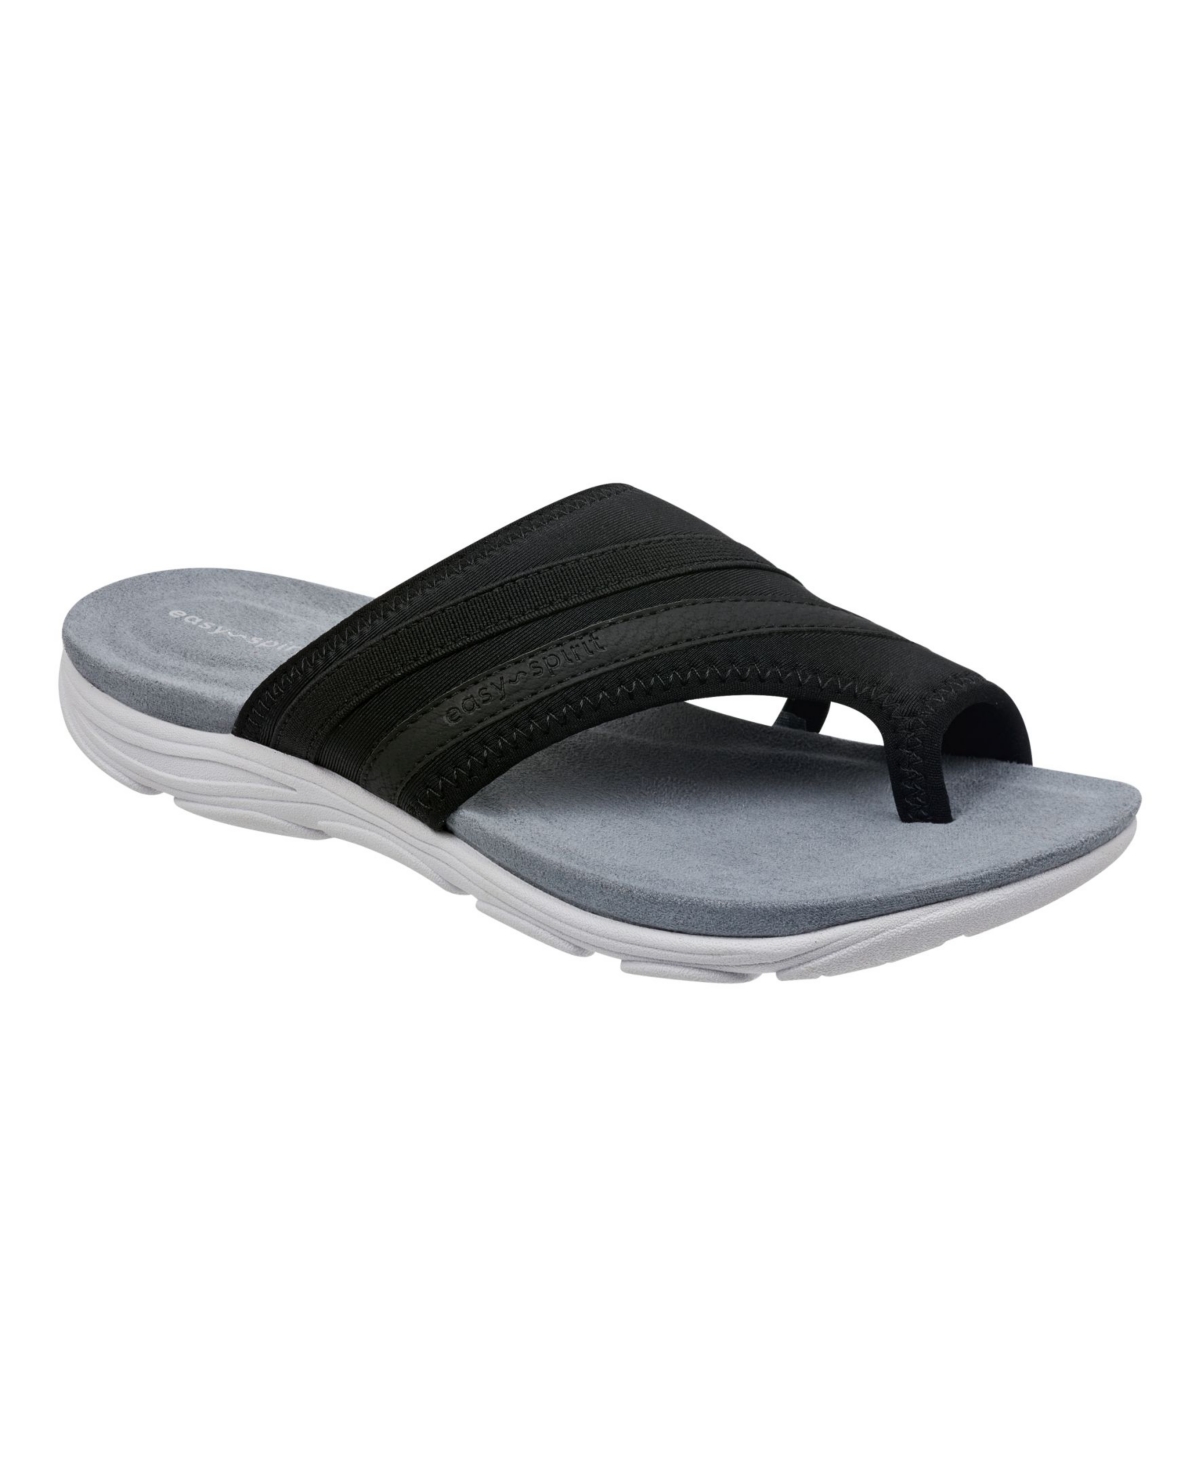 UPC 192733437090 product image for Easy Spirit Women's Lola Square Toe Casual Toe Ring Flat Sandals Women's Shoes | upcitemdb.com